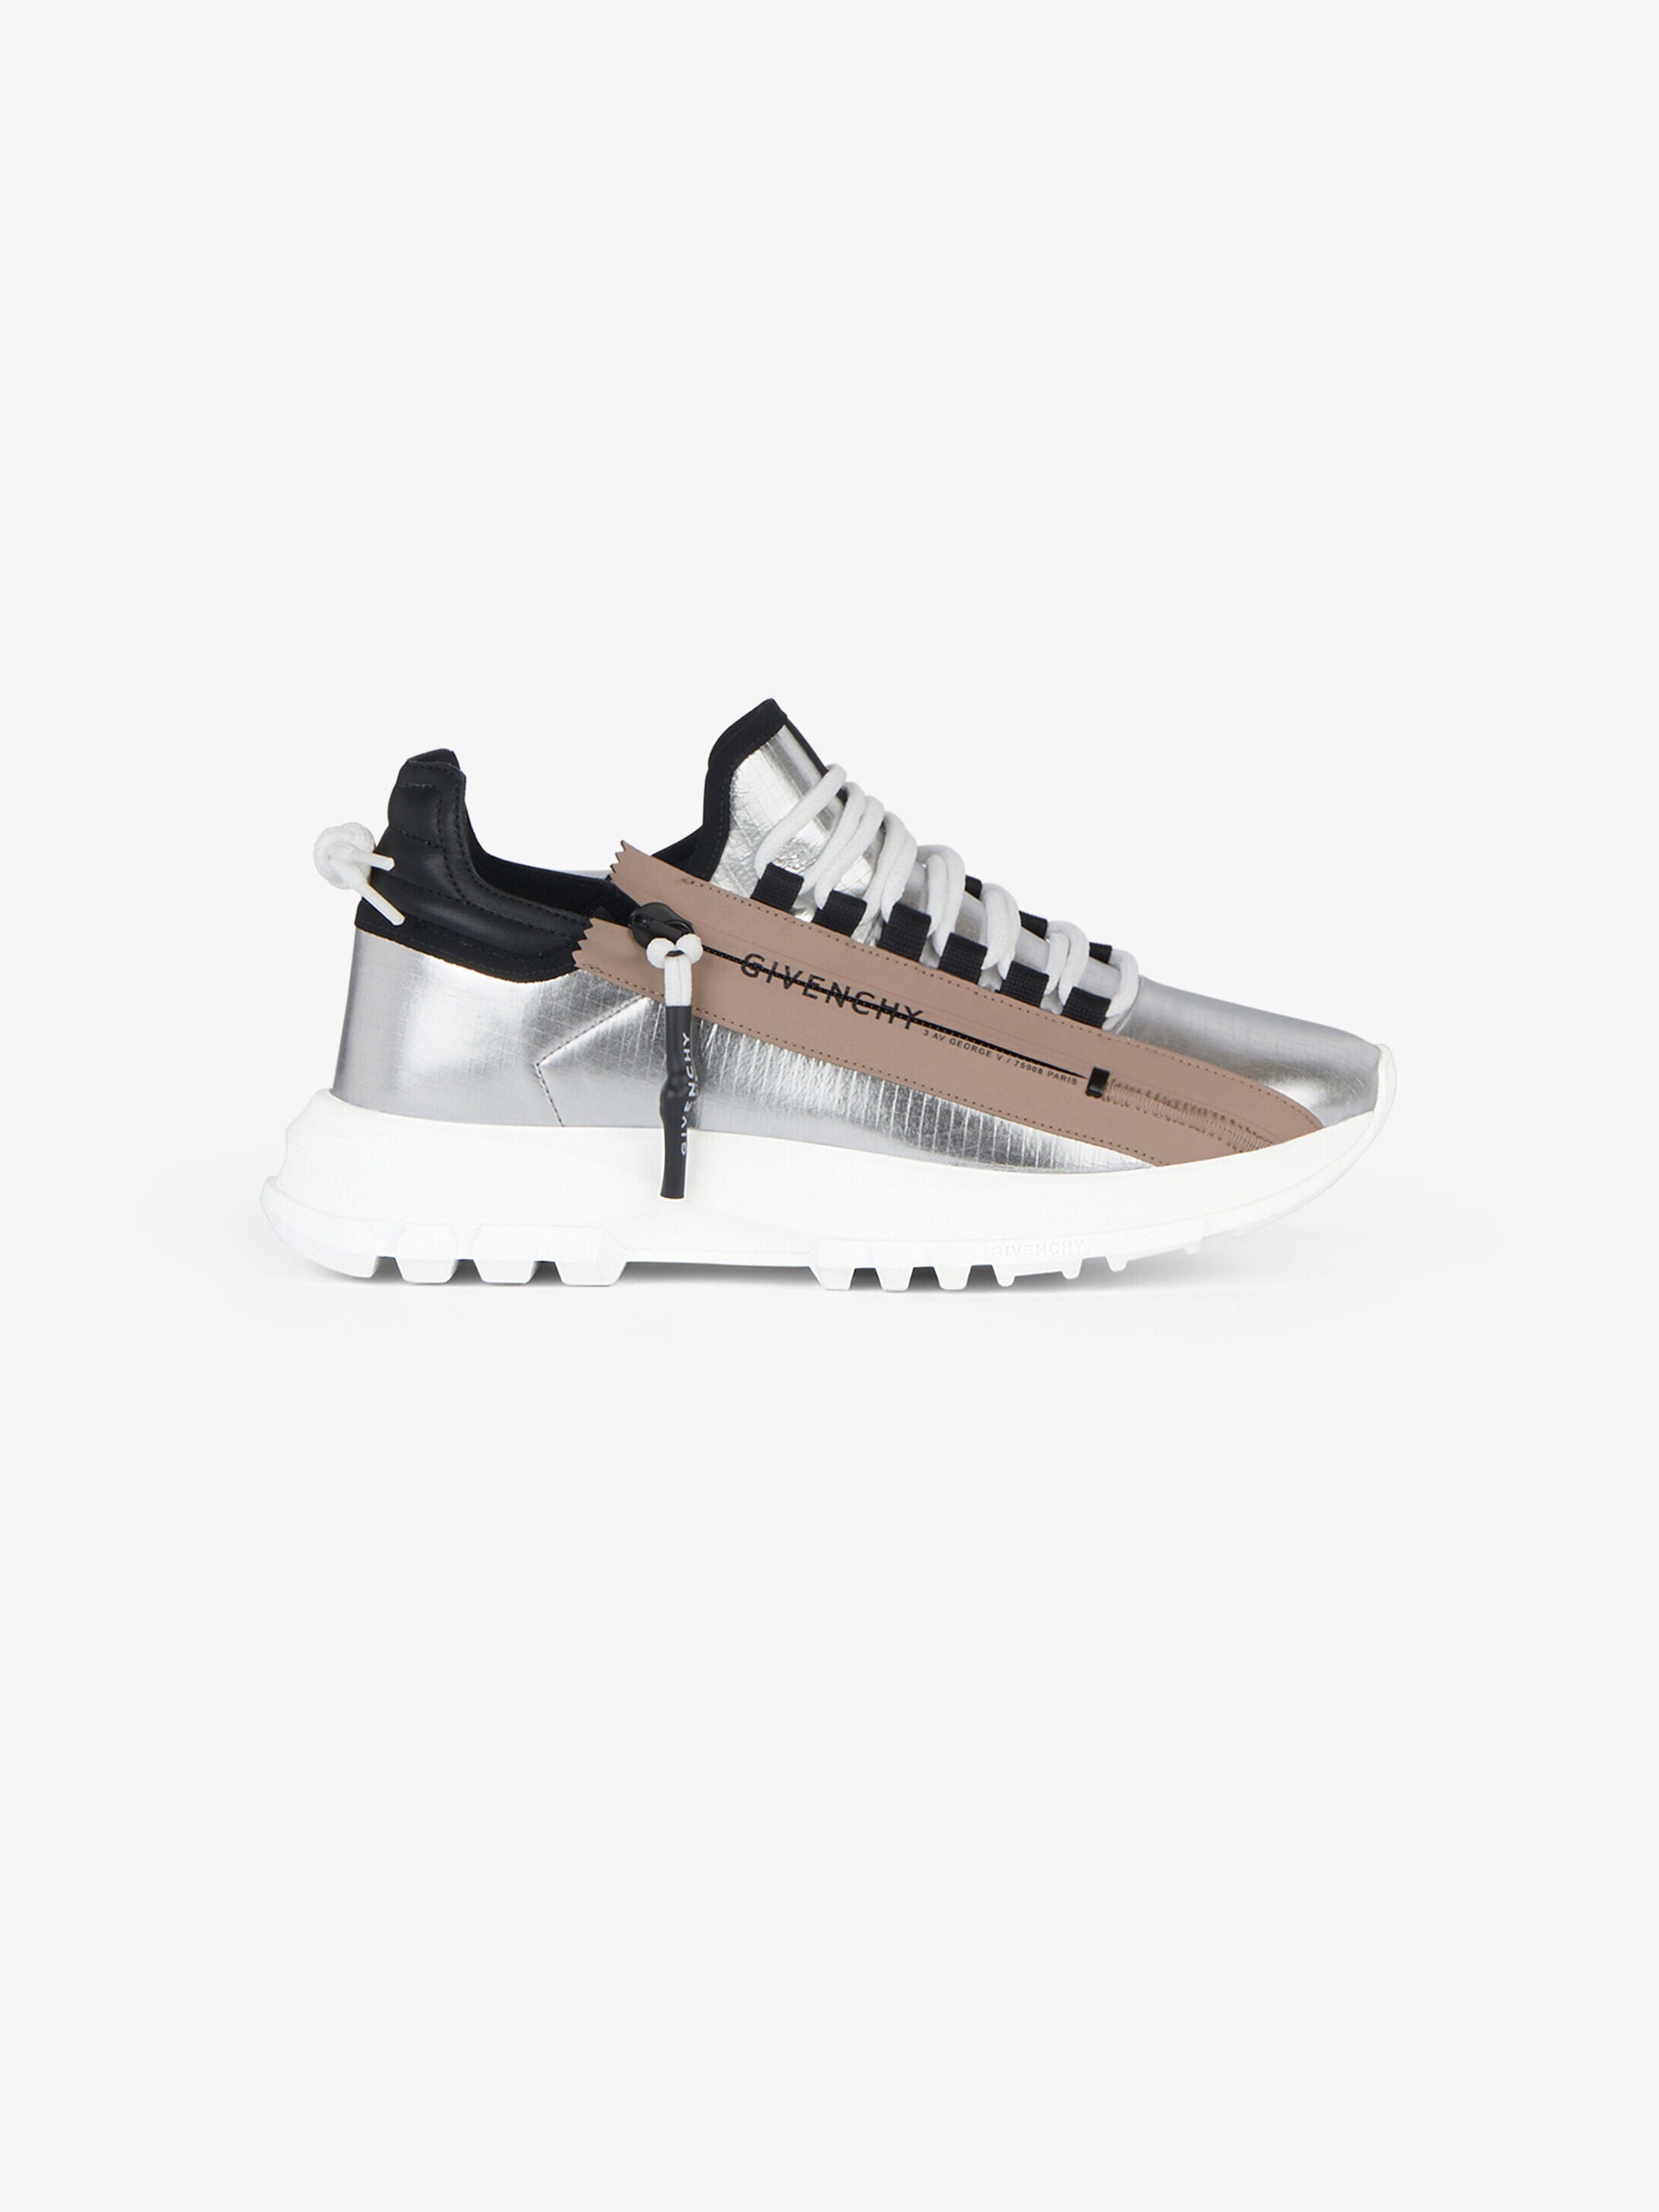 givenchy sneakers womens price